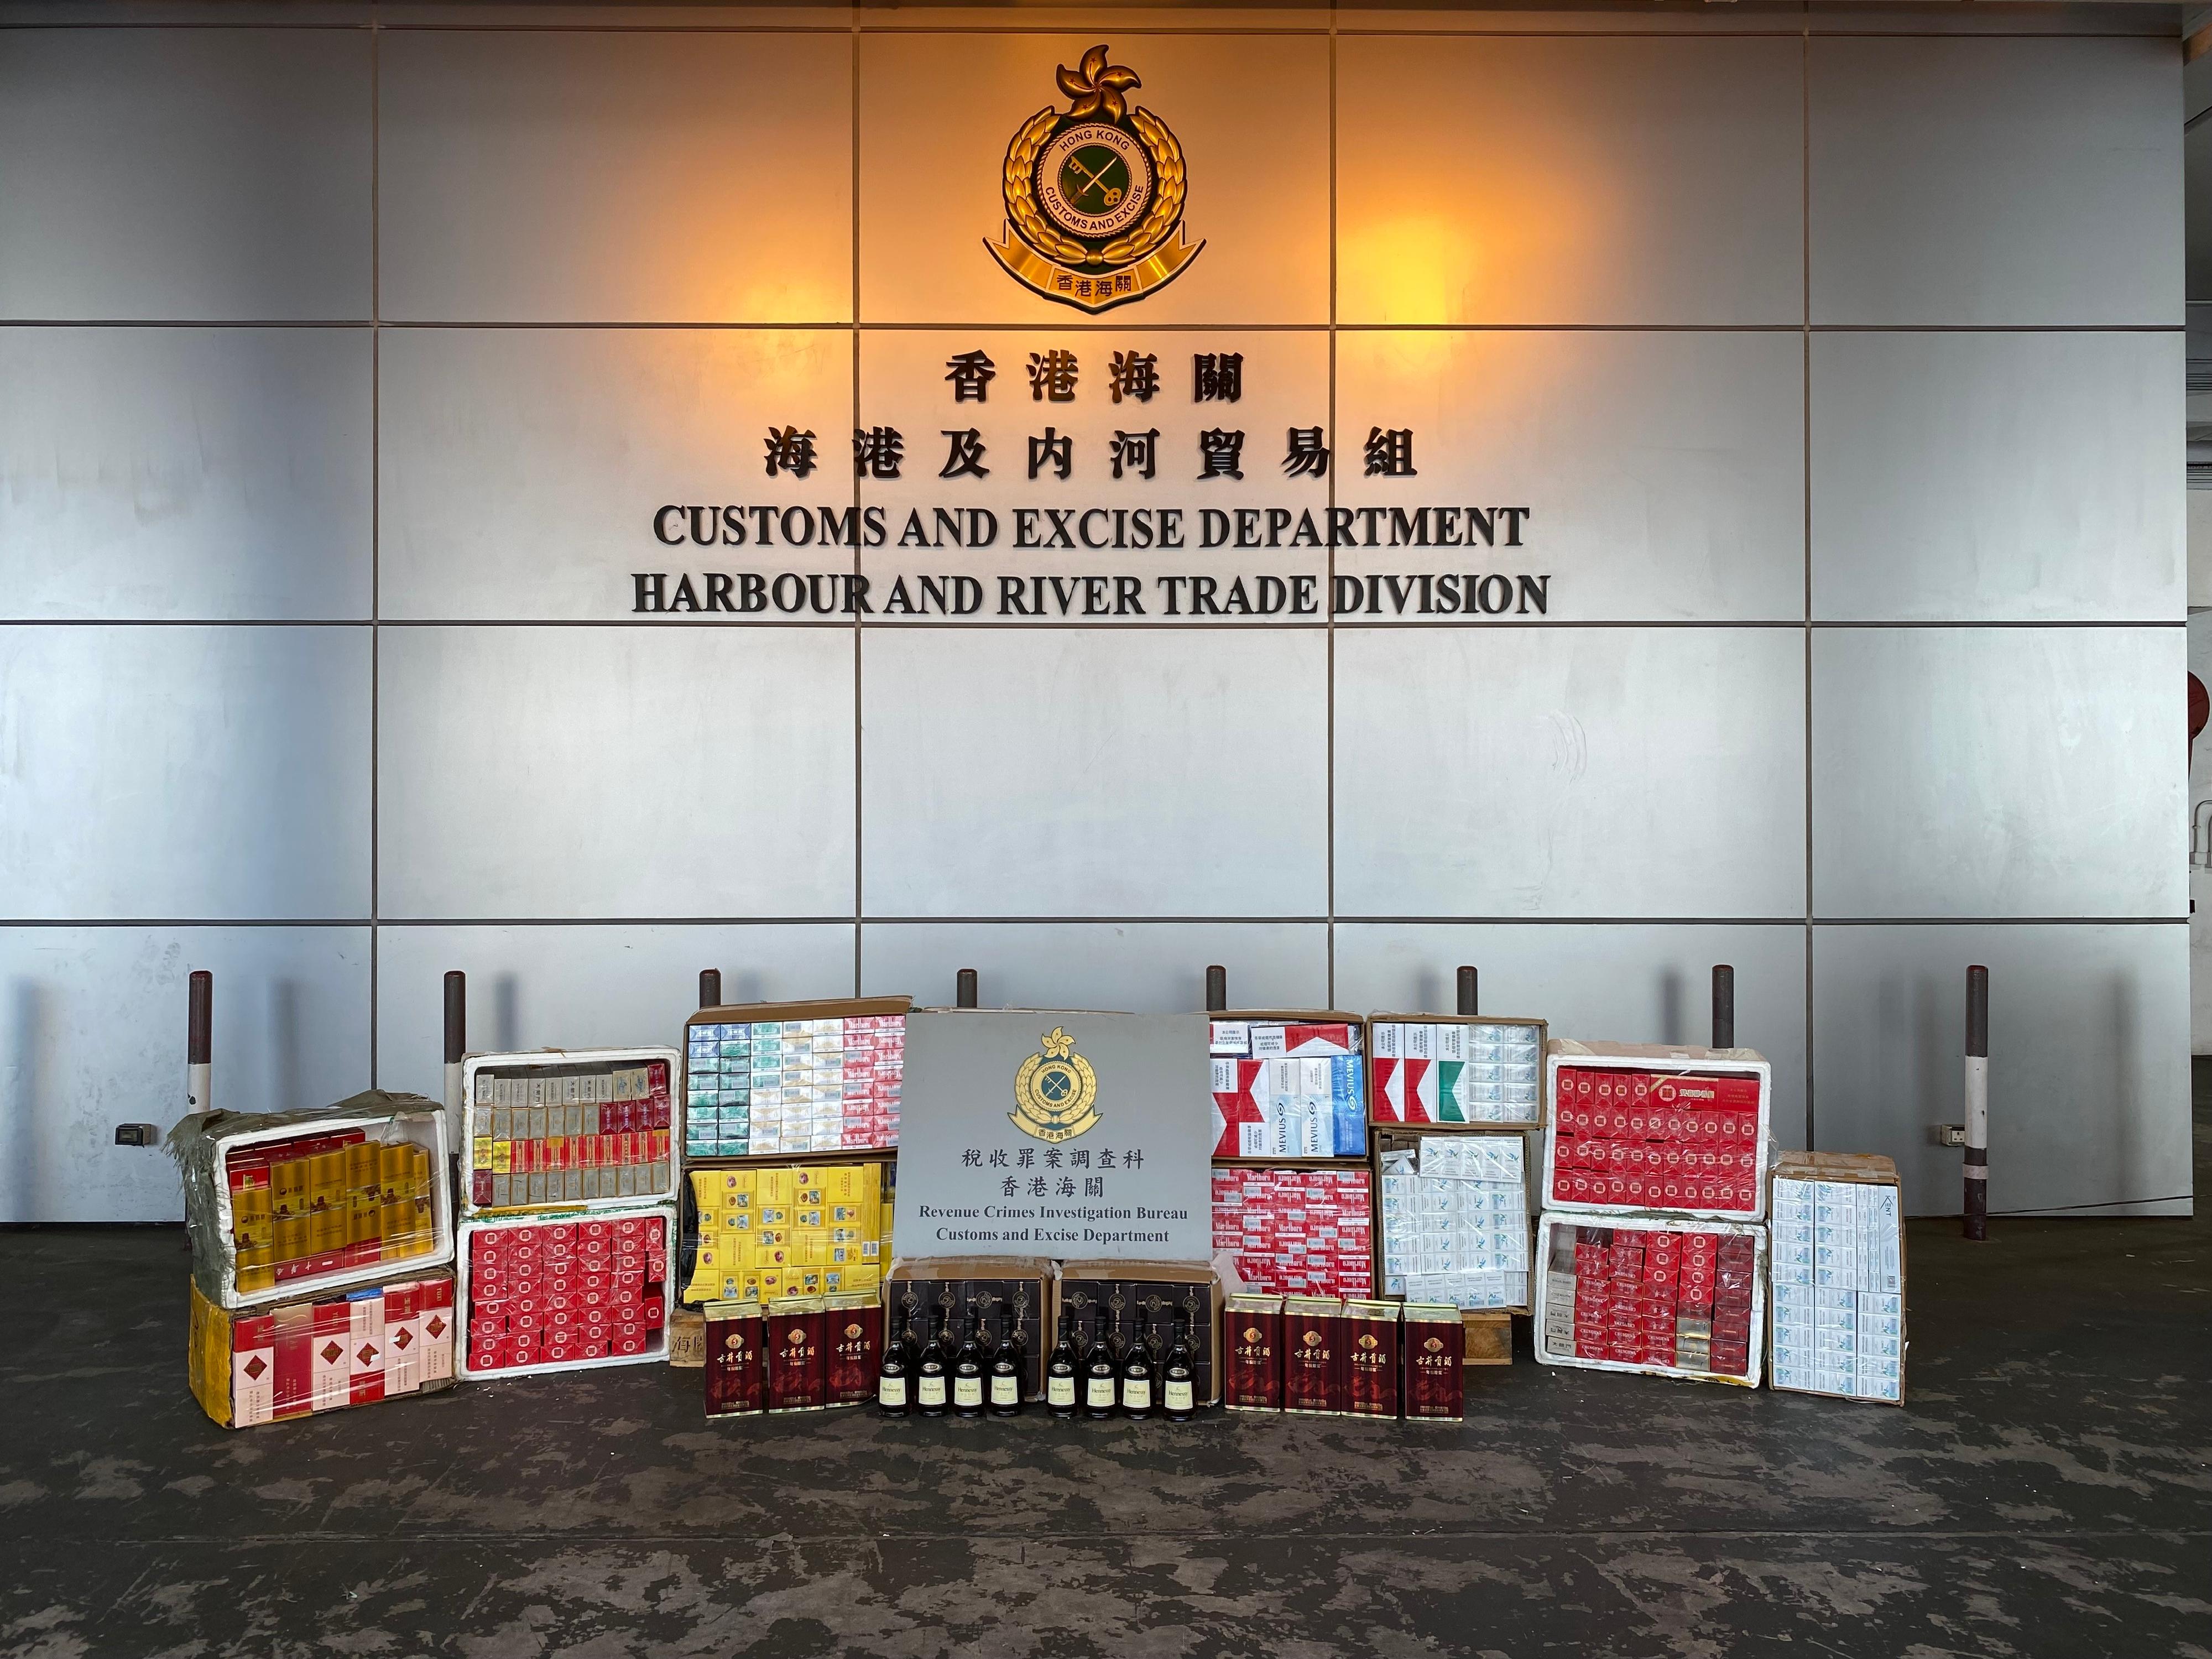 Hong Kong Customs on February 8 and 13 seized a batch of suspected smuggled tobacco products and liquor at the Tuen Mun River Trade Terminal Customs Cargo Examination Compound. It included about 1.5 million suspected illicit cigarettes, about 3 600 kilograms of suspected duty-not-paid manufactured tobacco and about 20 litres of suspected duty-not-paid liquor. The total estimated market value was about $14 million, with a duty potential of about $11 million. Photo shows the suspected smuggled tobacco products and liquor seized by Customs officers on February 13.